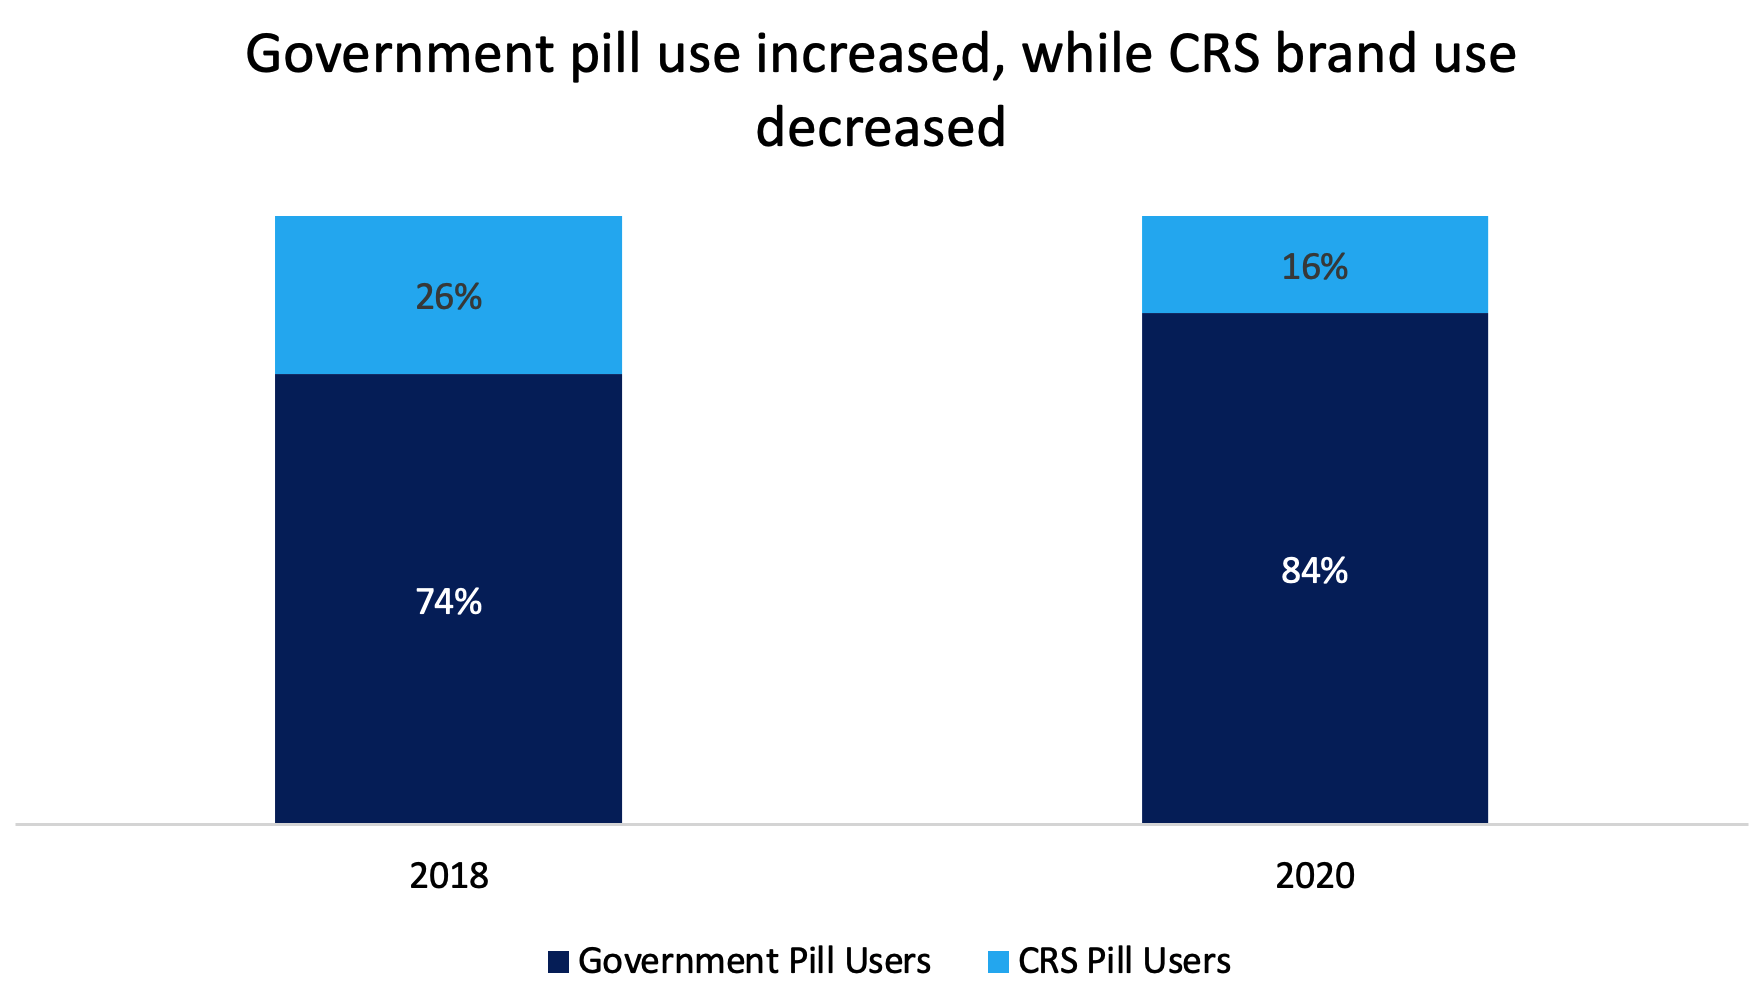 Bar chart titled, “Government pill use increased, while CRS brand use decreased”. Left bar is for 2018 and shows 74% government pill users and 26% CRS pill users. The second bar is for 2020 and shows 84% government pill users and 16% CRS pill users.  